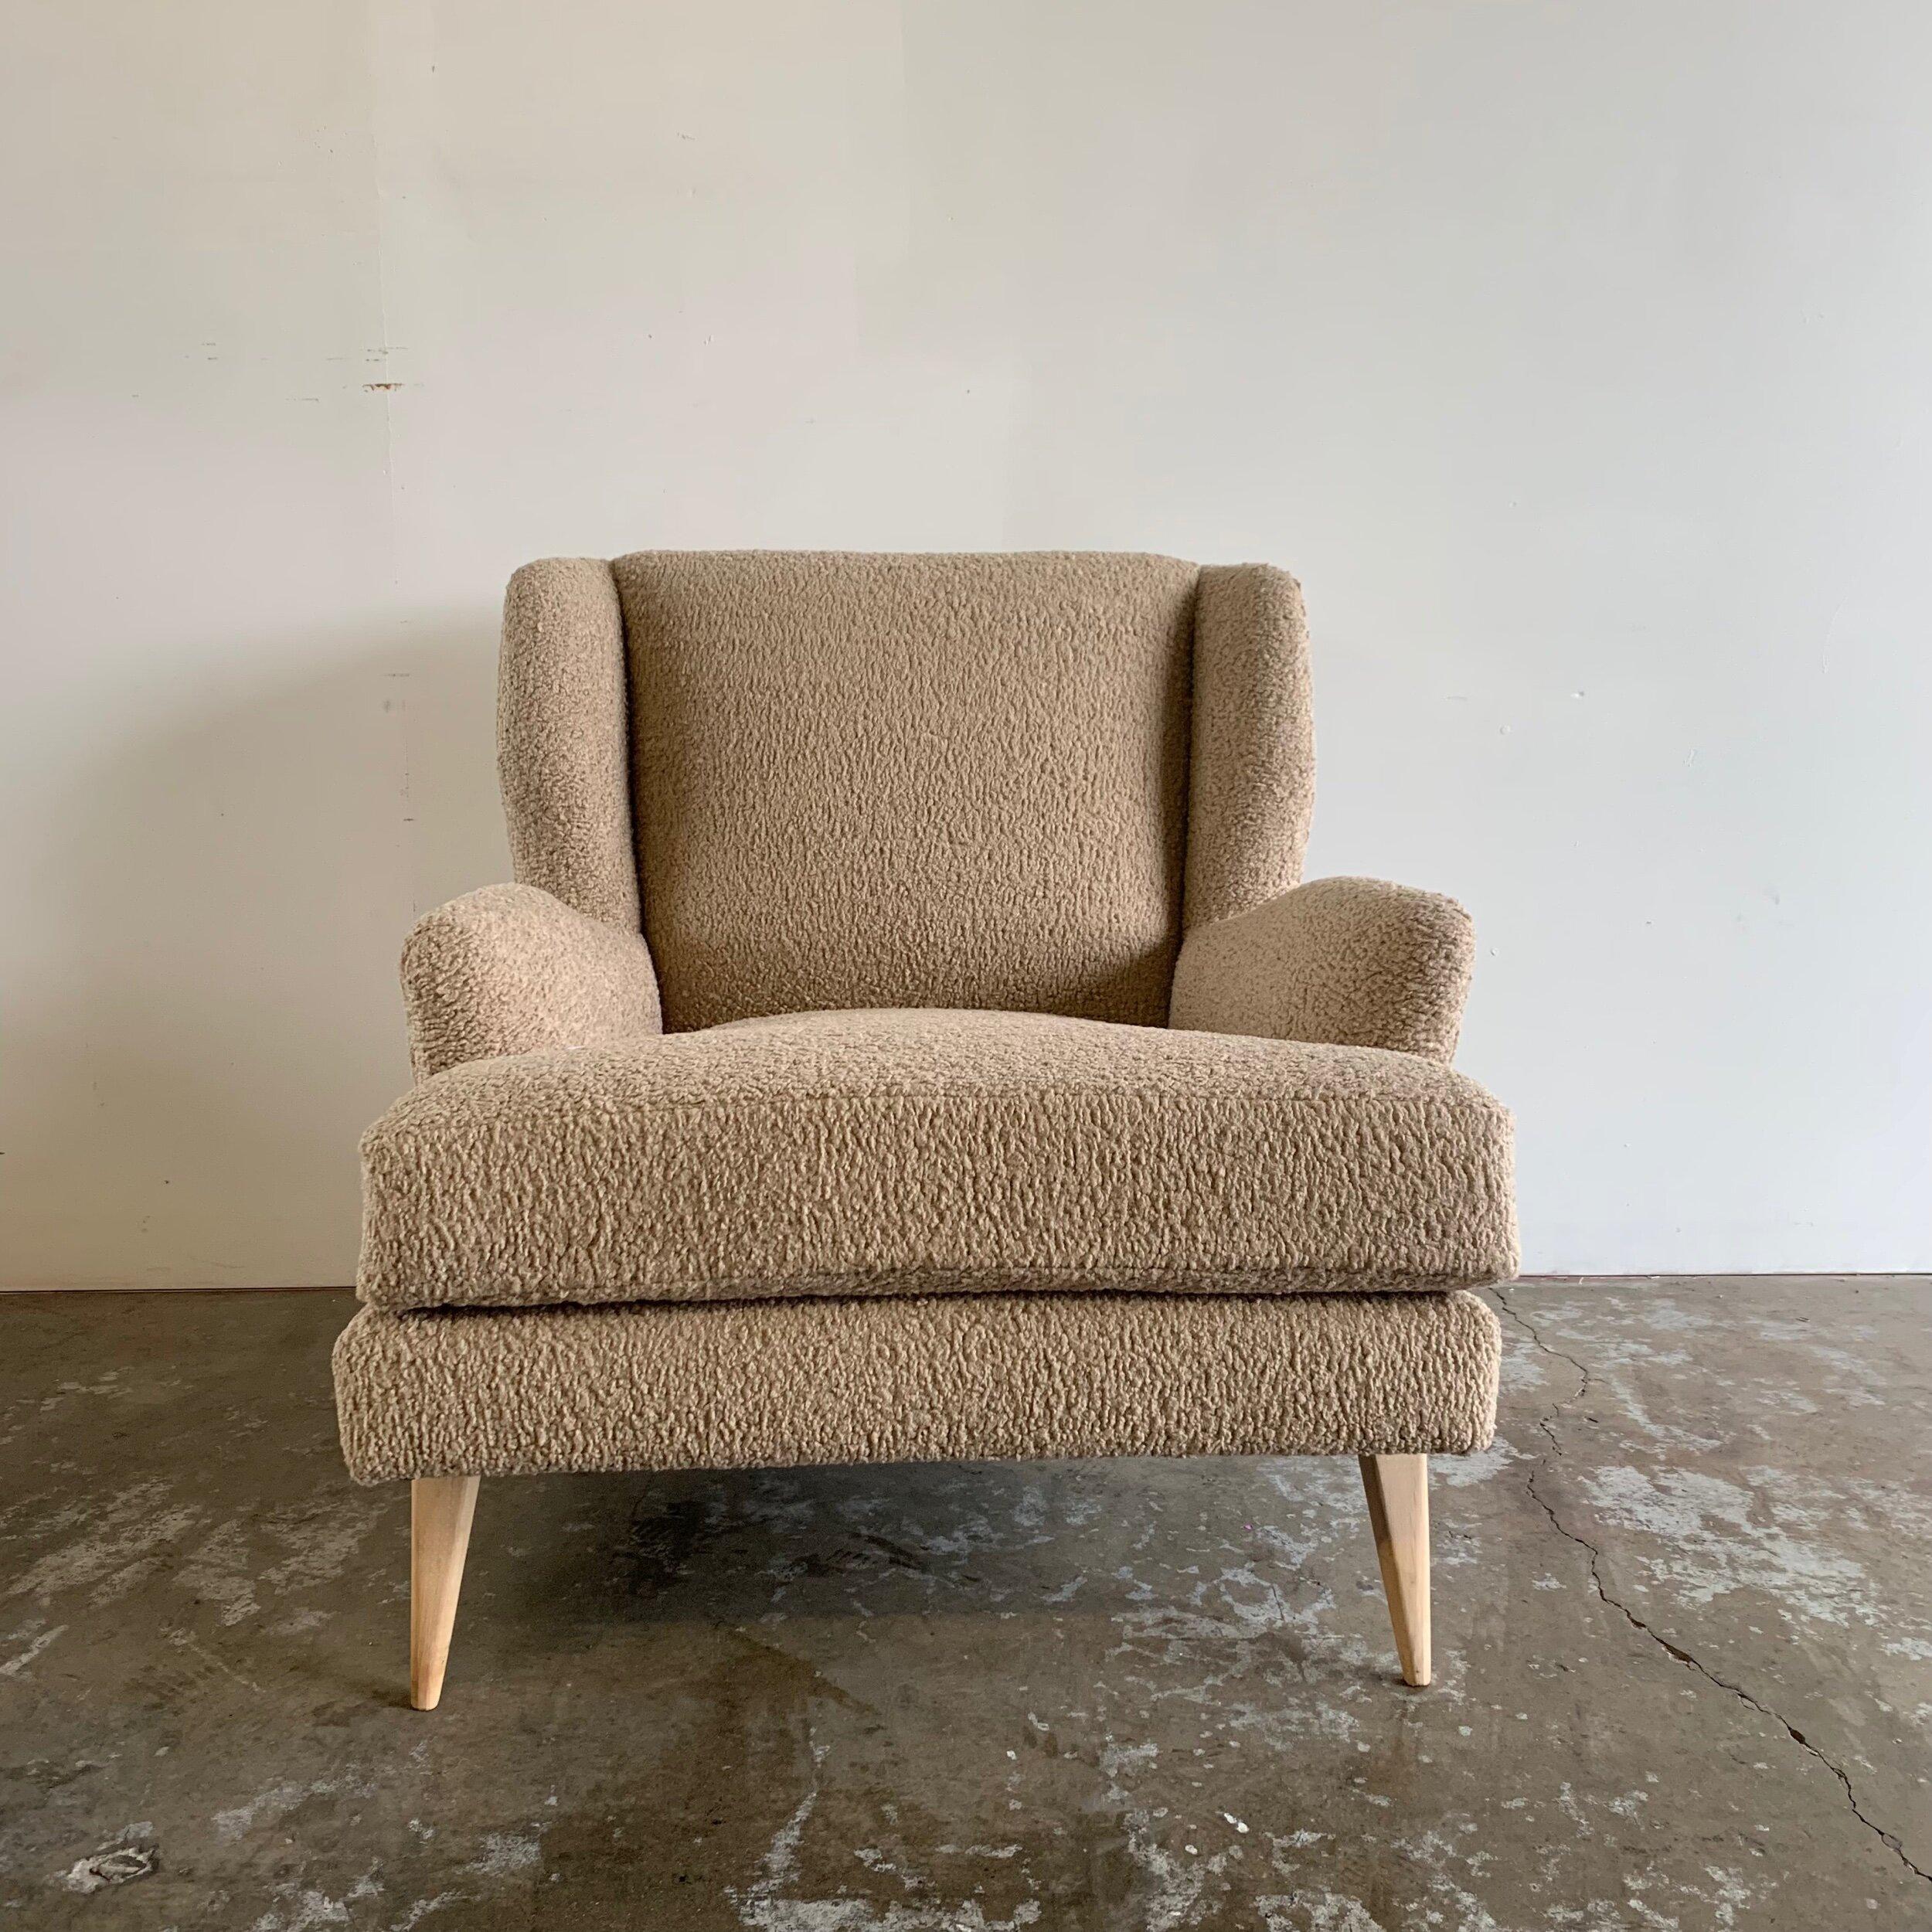 Handcrafted wingback chair in toast Sherpa fabric. Item can be custom made in preferred wood, upholstery, and dimensions for around the same price point or additional fees depending on materials. Lead time 2-3weeks.